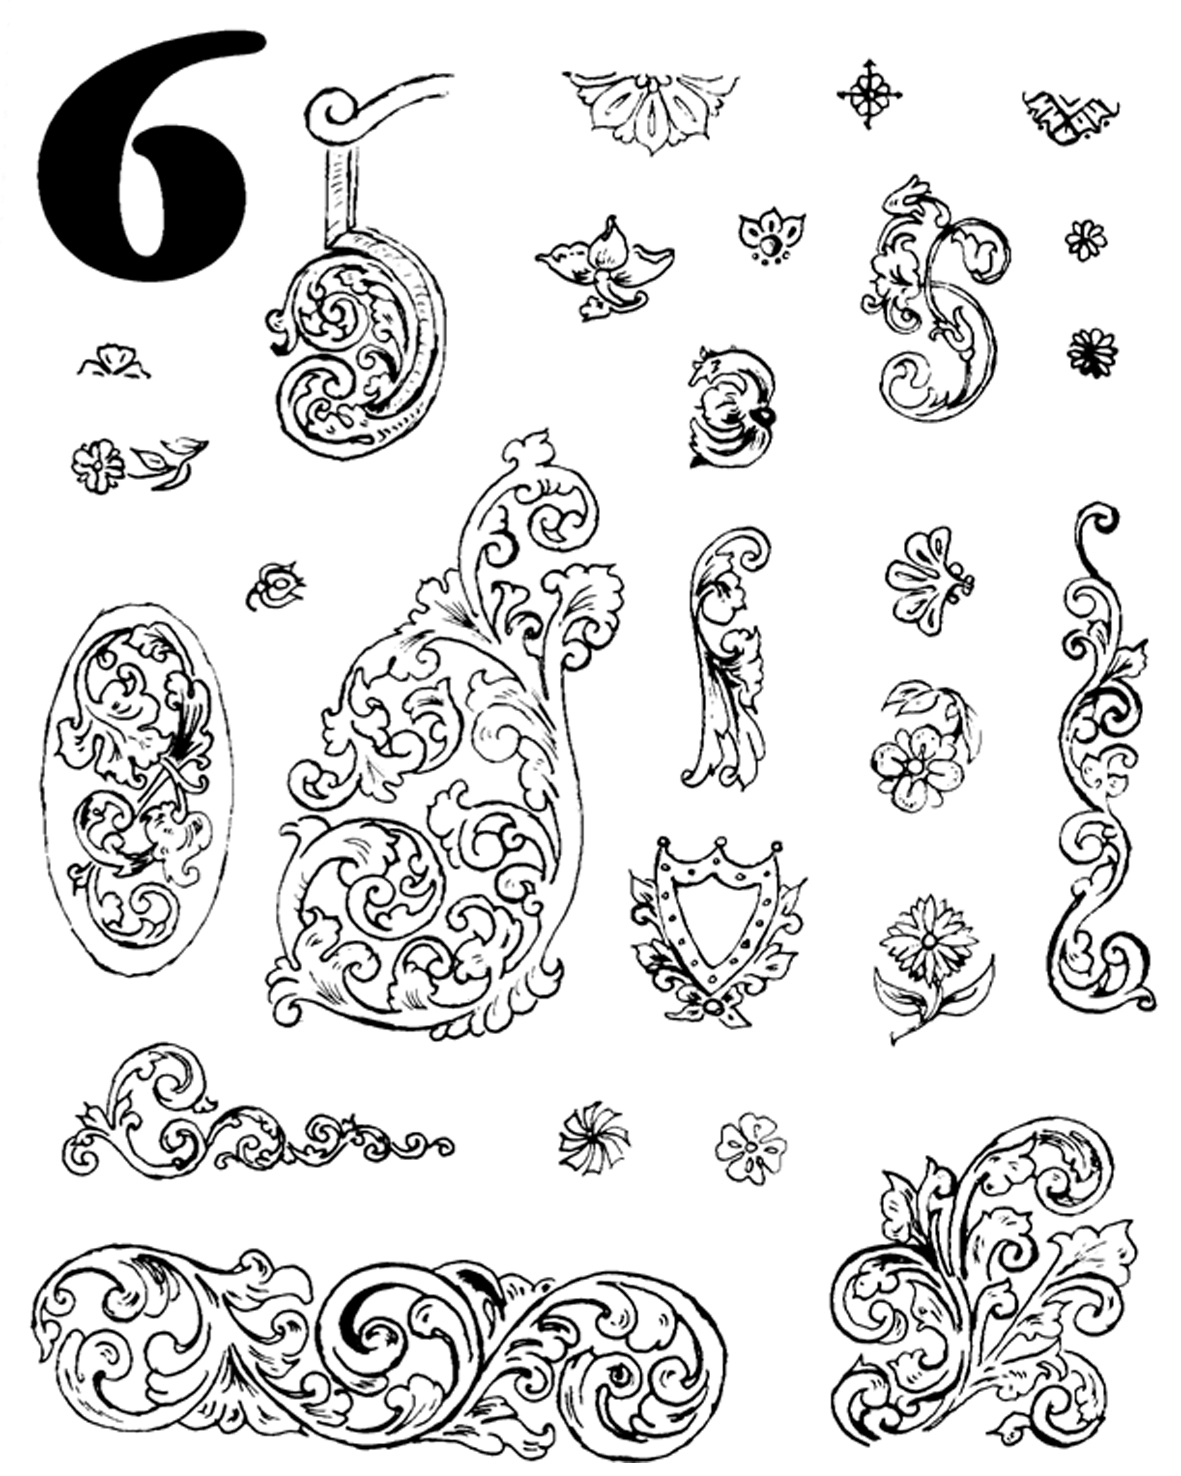 Template for stamping, sheet no.6 for right-handers